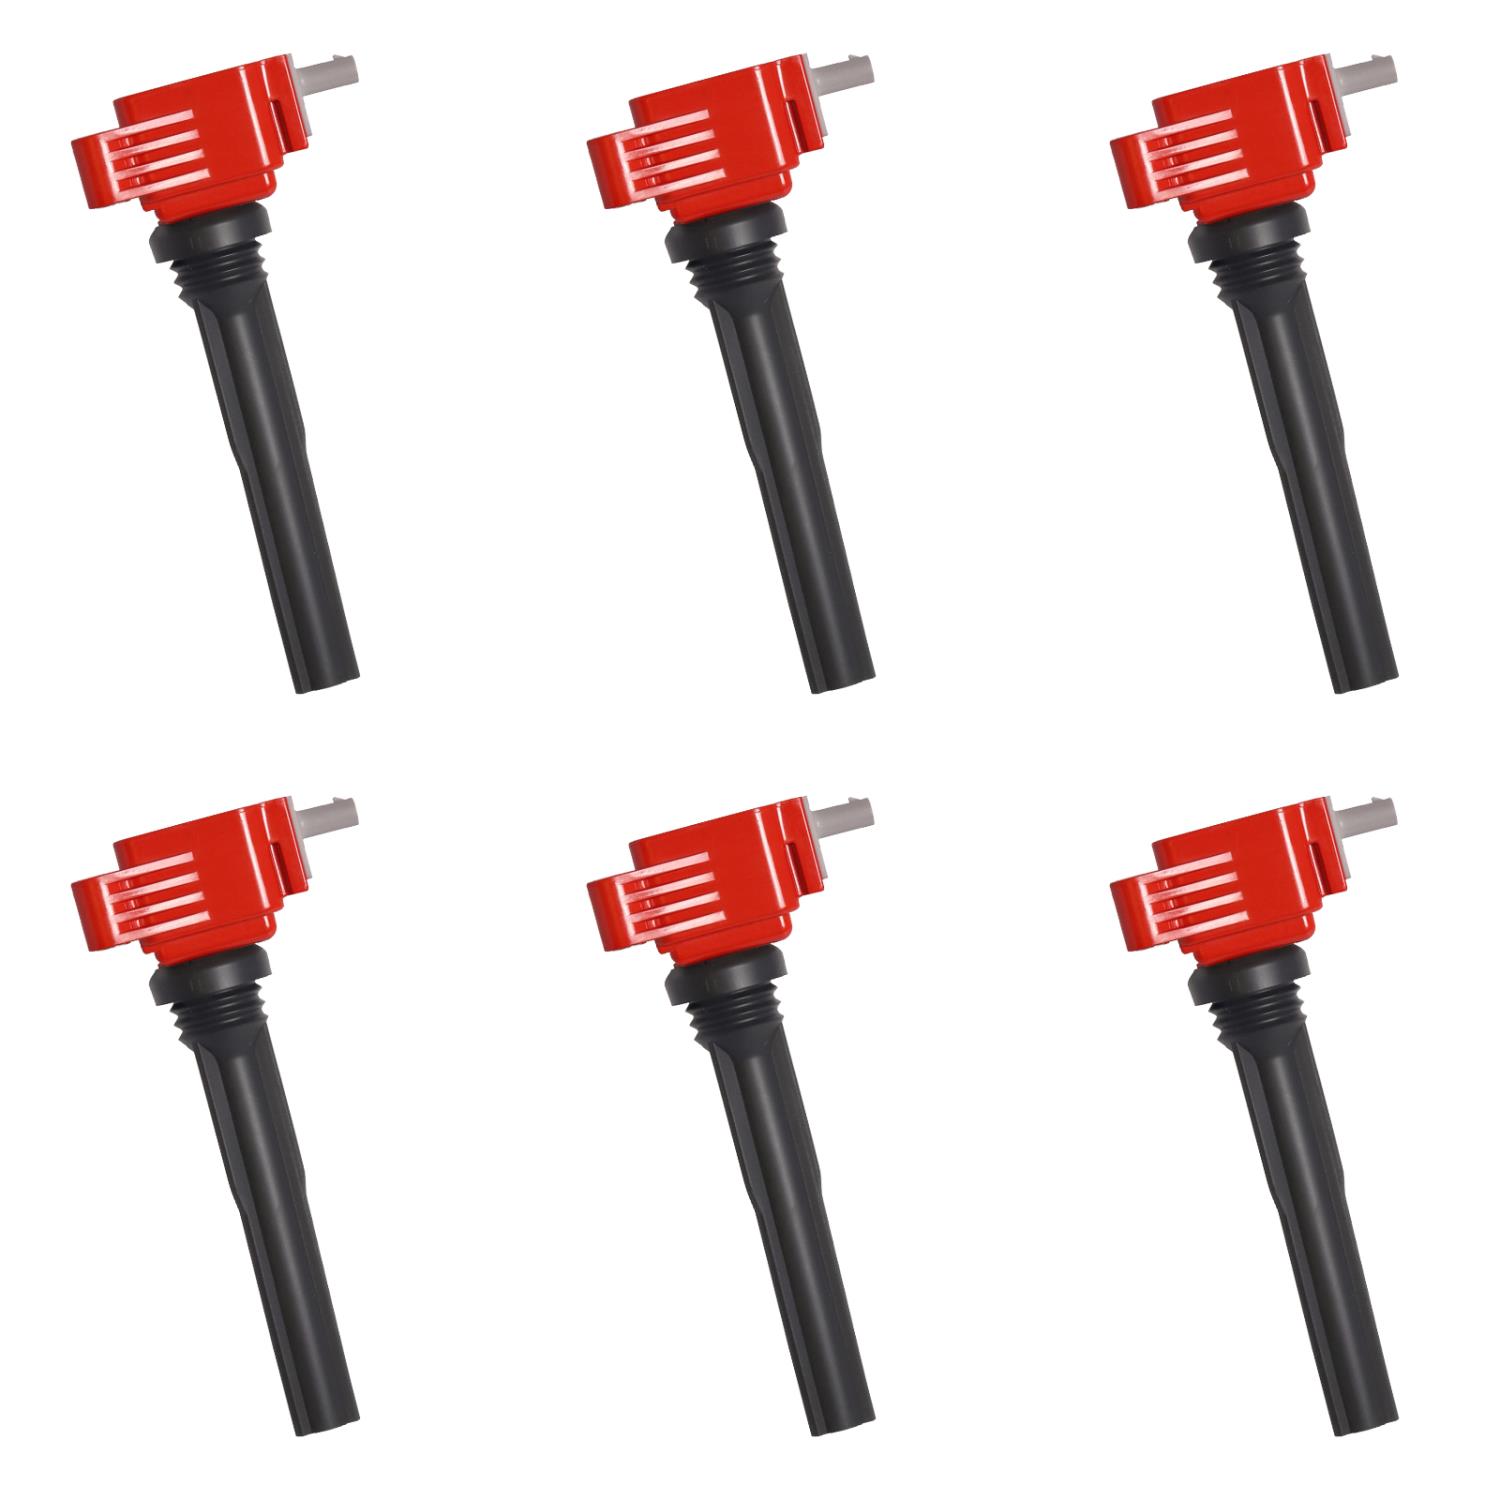 High-Performance Ignition Coils for Ford F-150/Expedition/GT, Lincoln Navigator [Red]